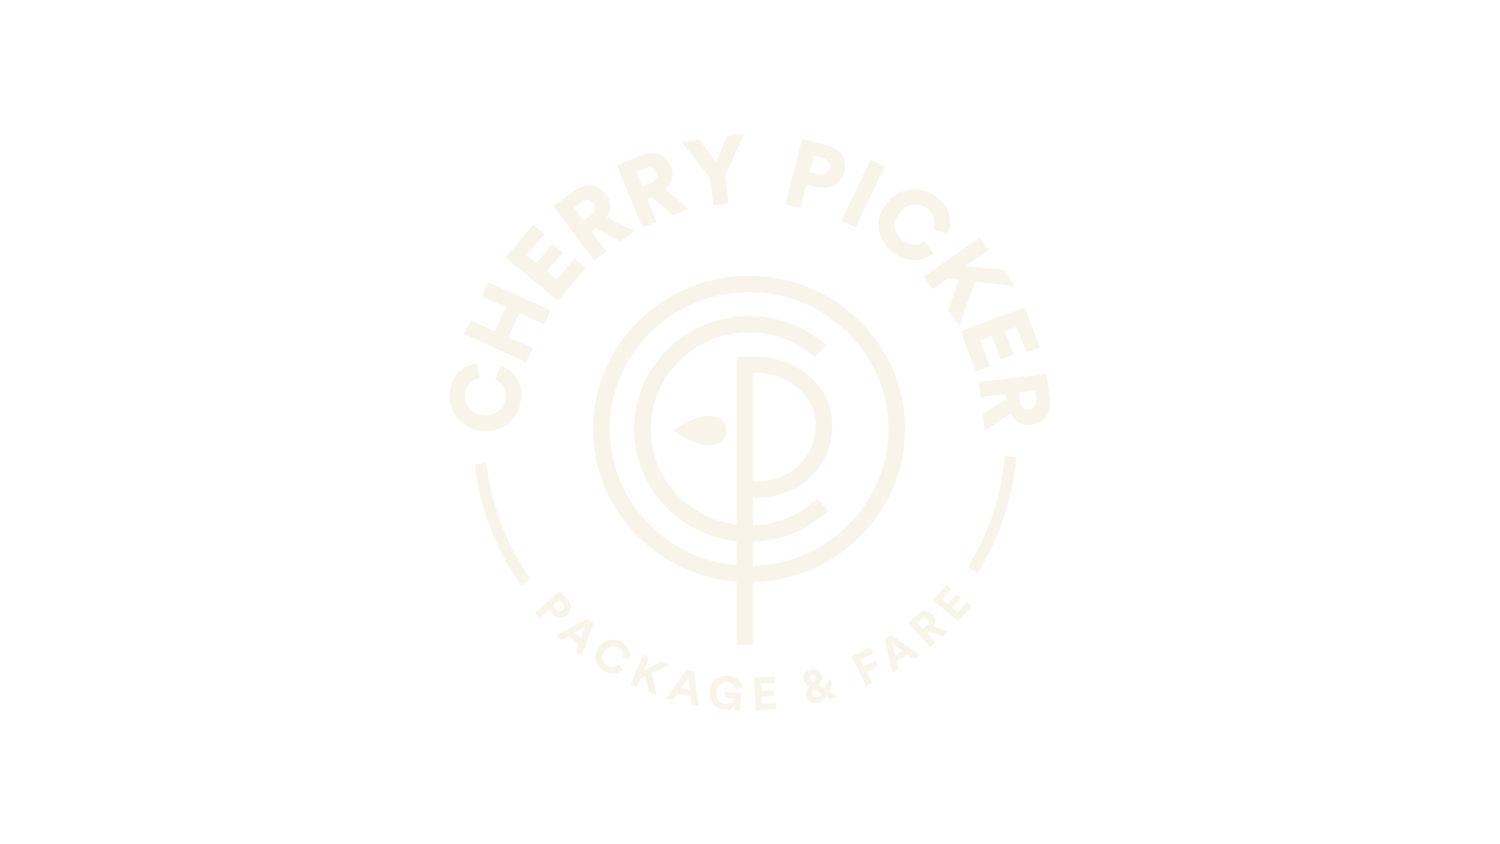 Cherry Picker Package &amp; Fare